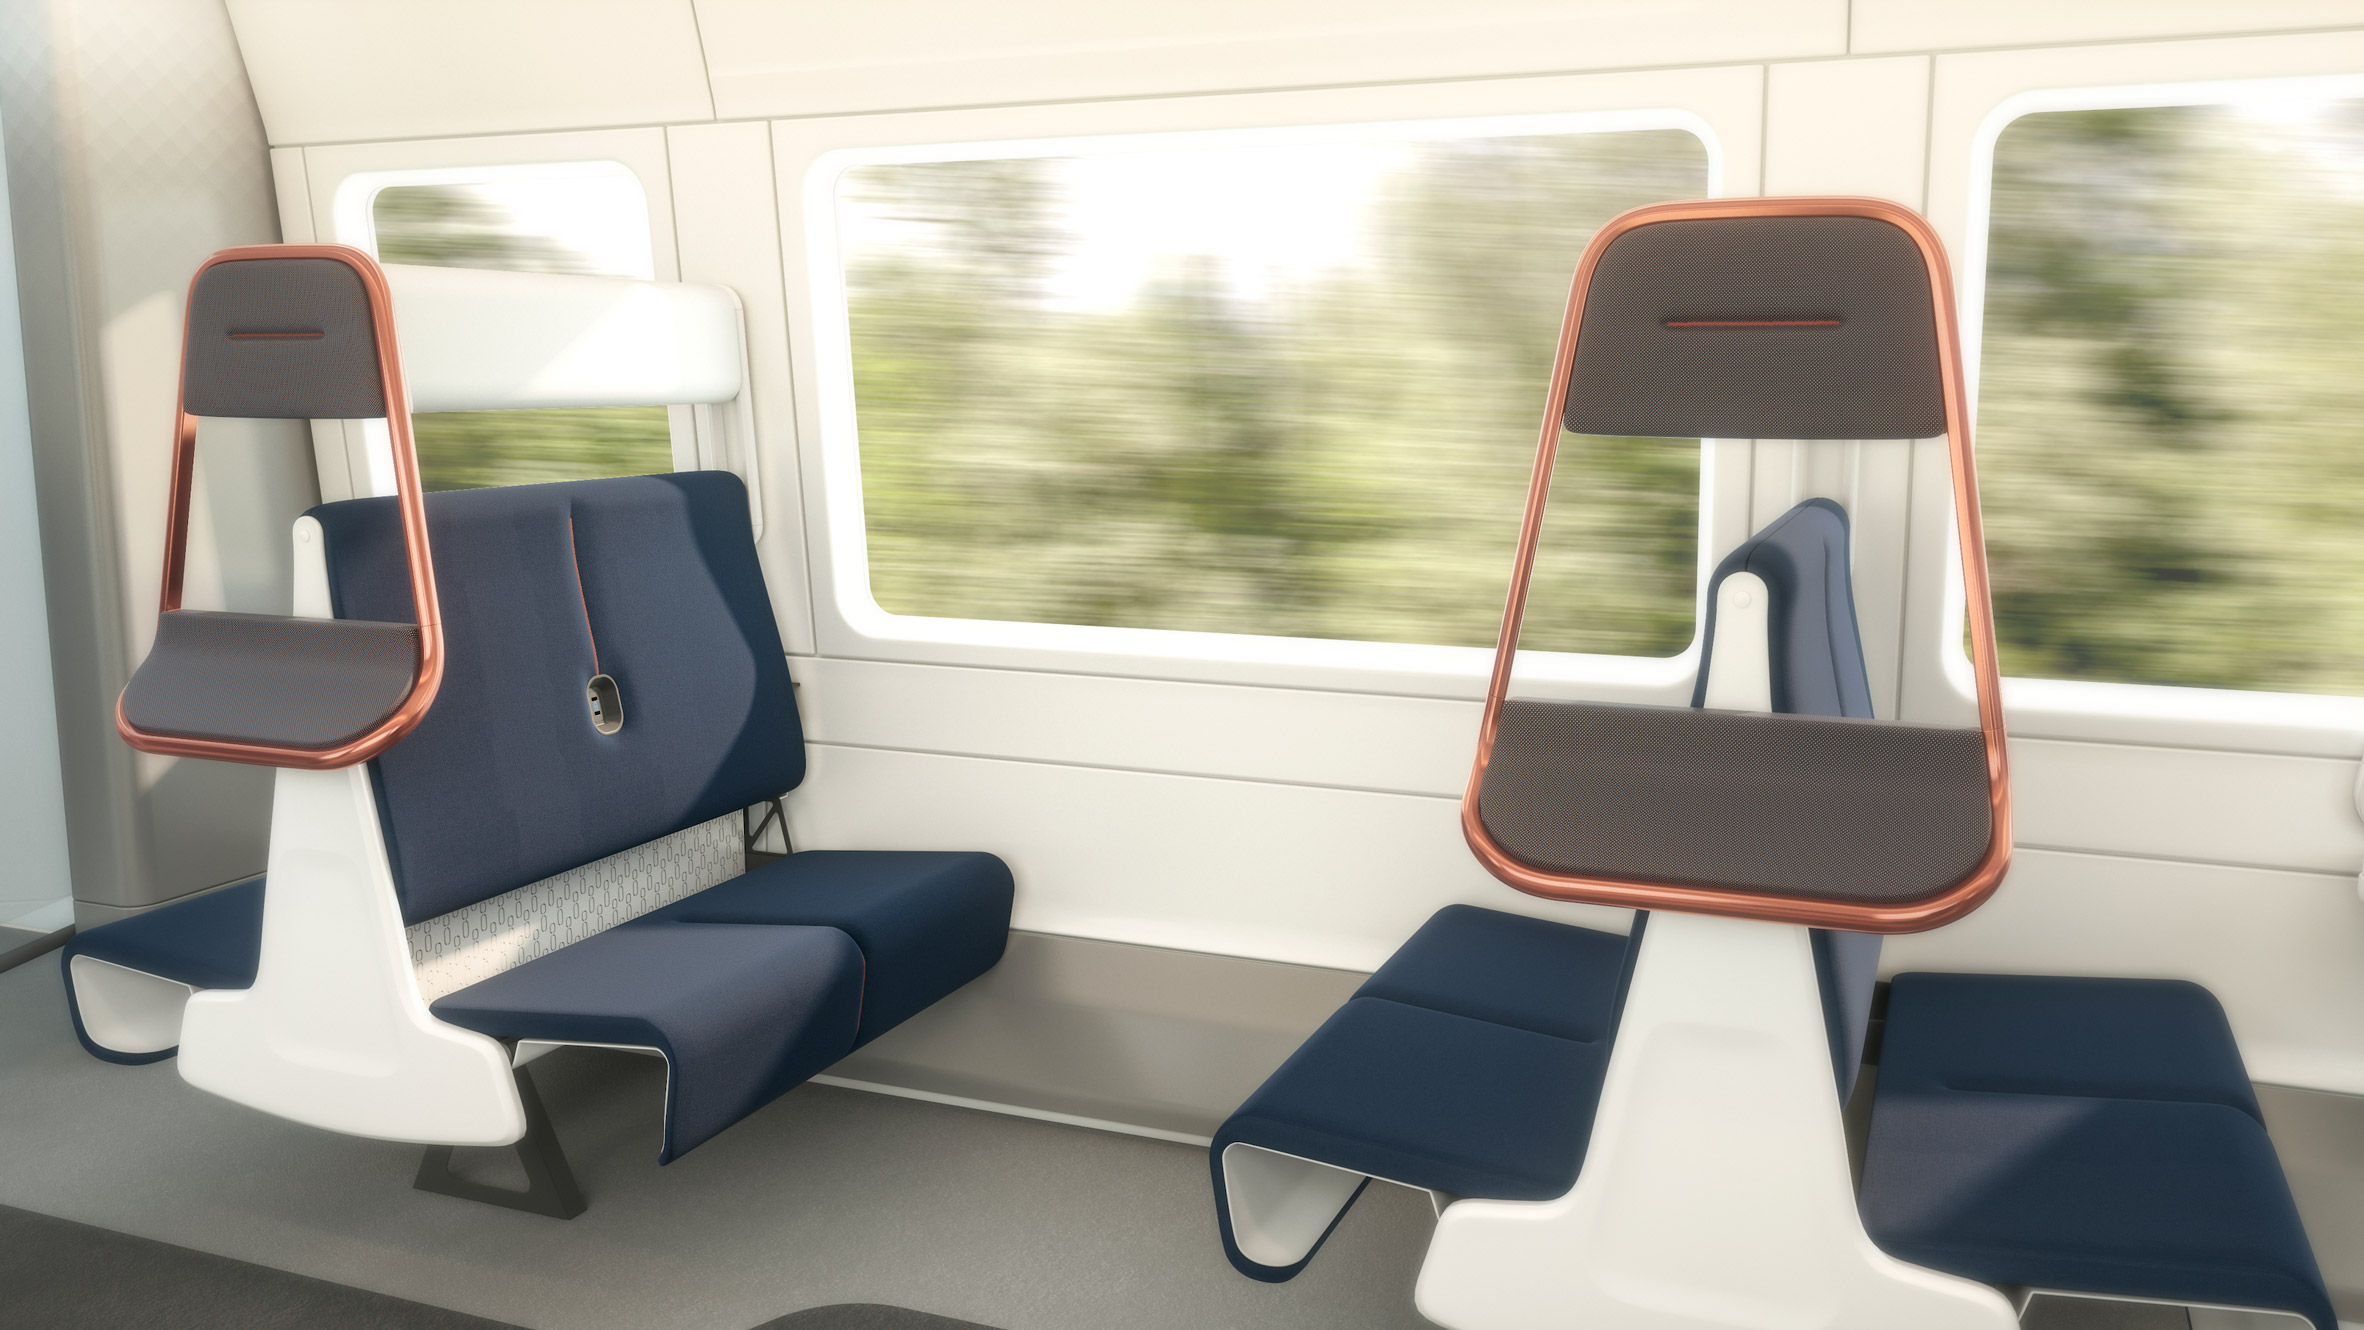 PriestmanGoode updates its Island Bay train seating for socially distanced London commutes